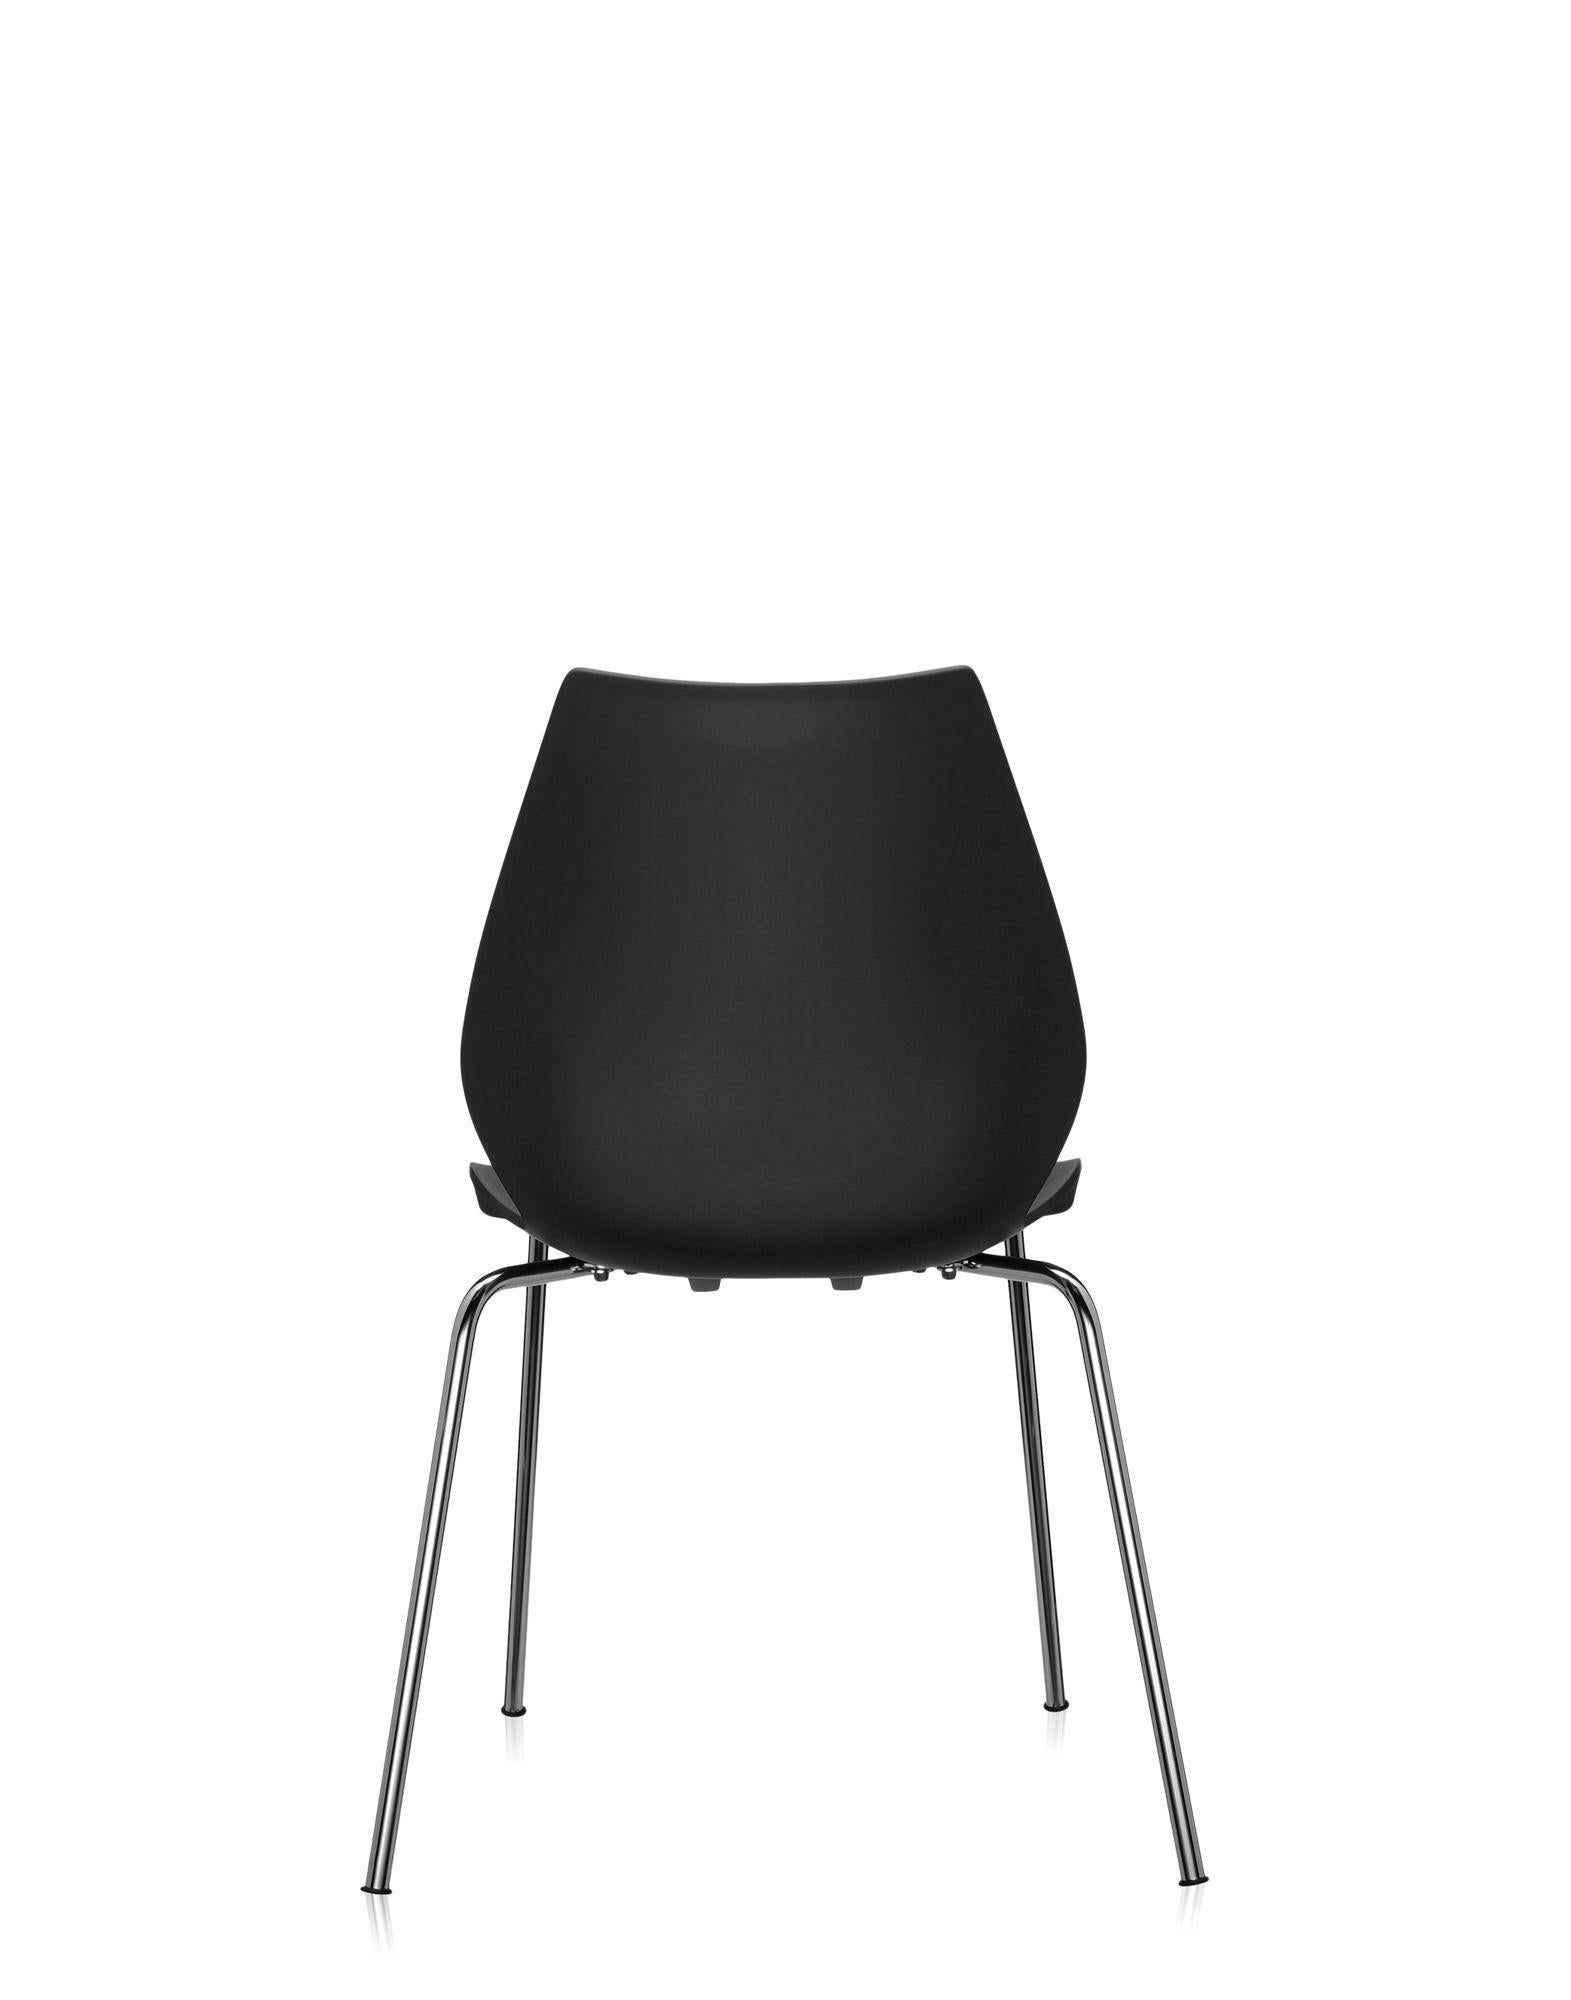 Contemporary Set of 2 Kartell Maui Armchair in Black by Vico Magistretti